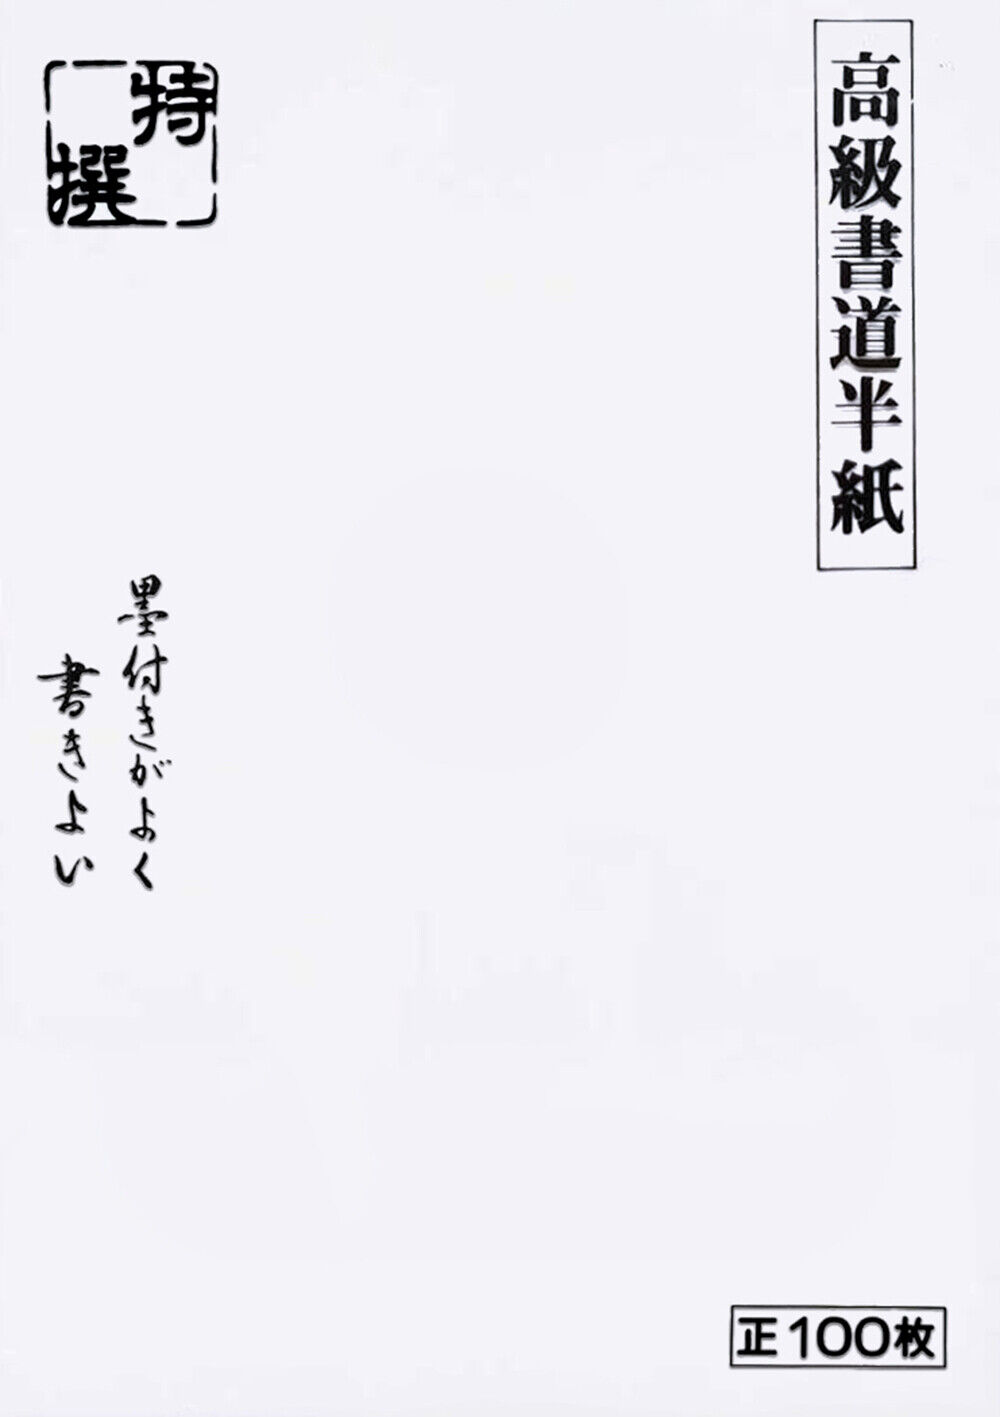 Japanese Chinese Calligraphy Rice Paper 100 Sheets #1932 S-1992